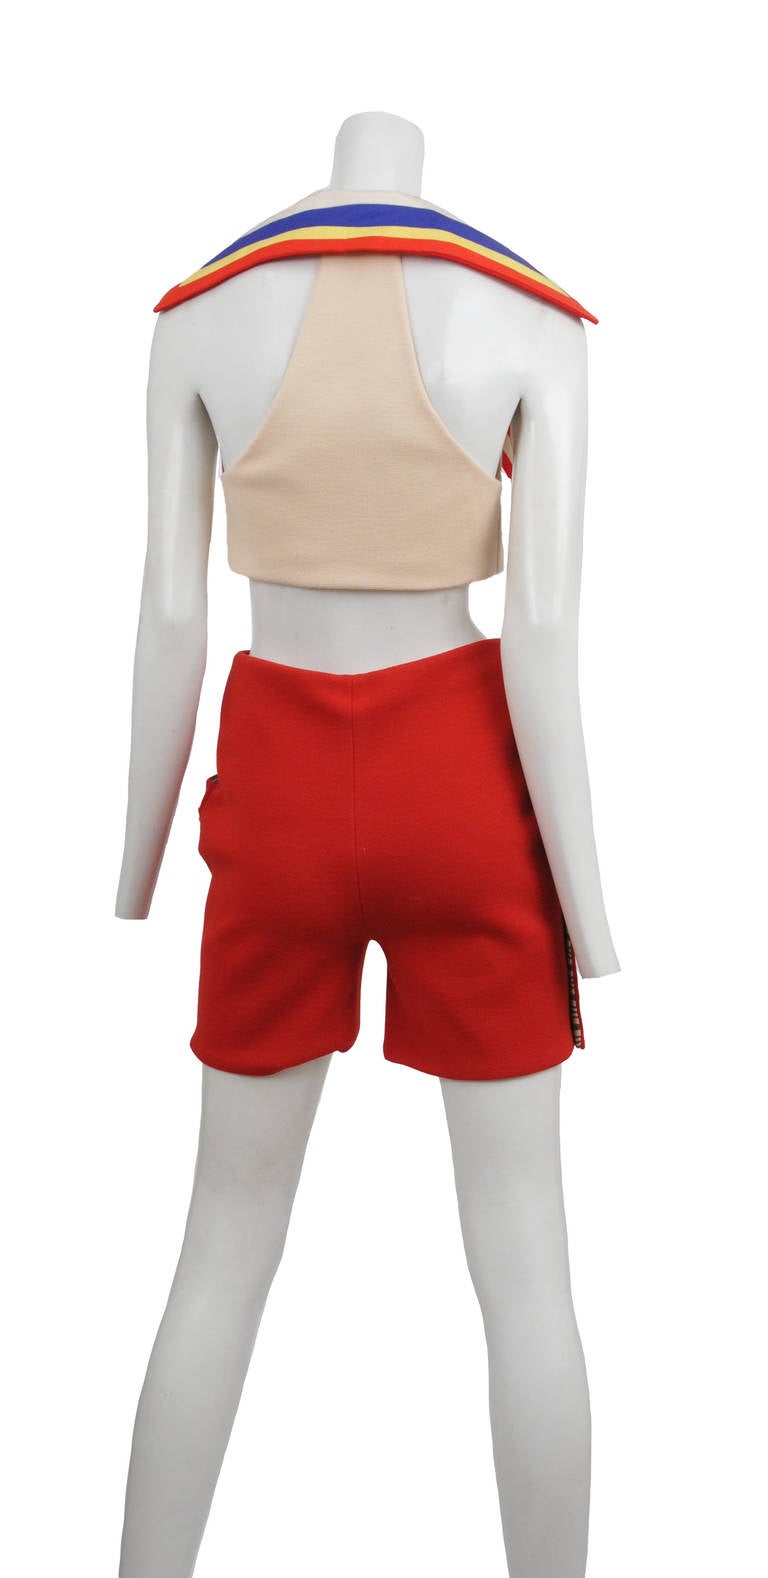 Vintage Gianni Versace off white and red double knit two piece ensemble. Fitted off white crop top with large mulit-colored striped pointed collar and red signature Versace buttons at front. The back of the top features a revealing open racer back